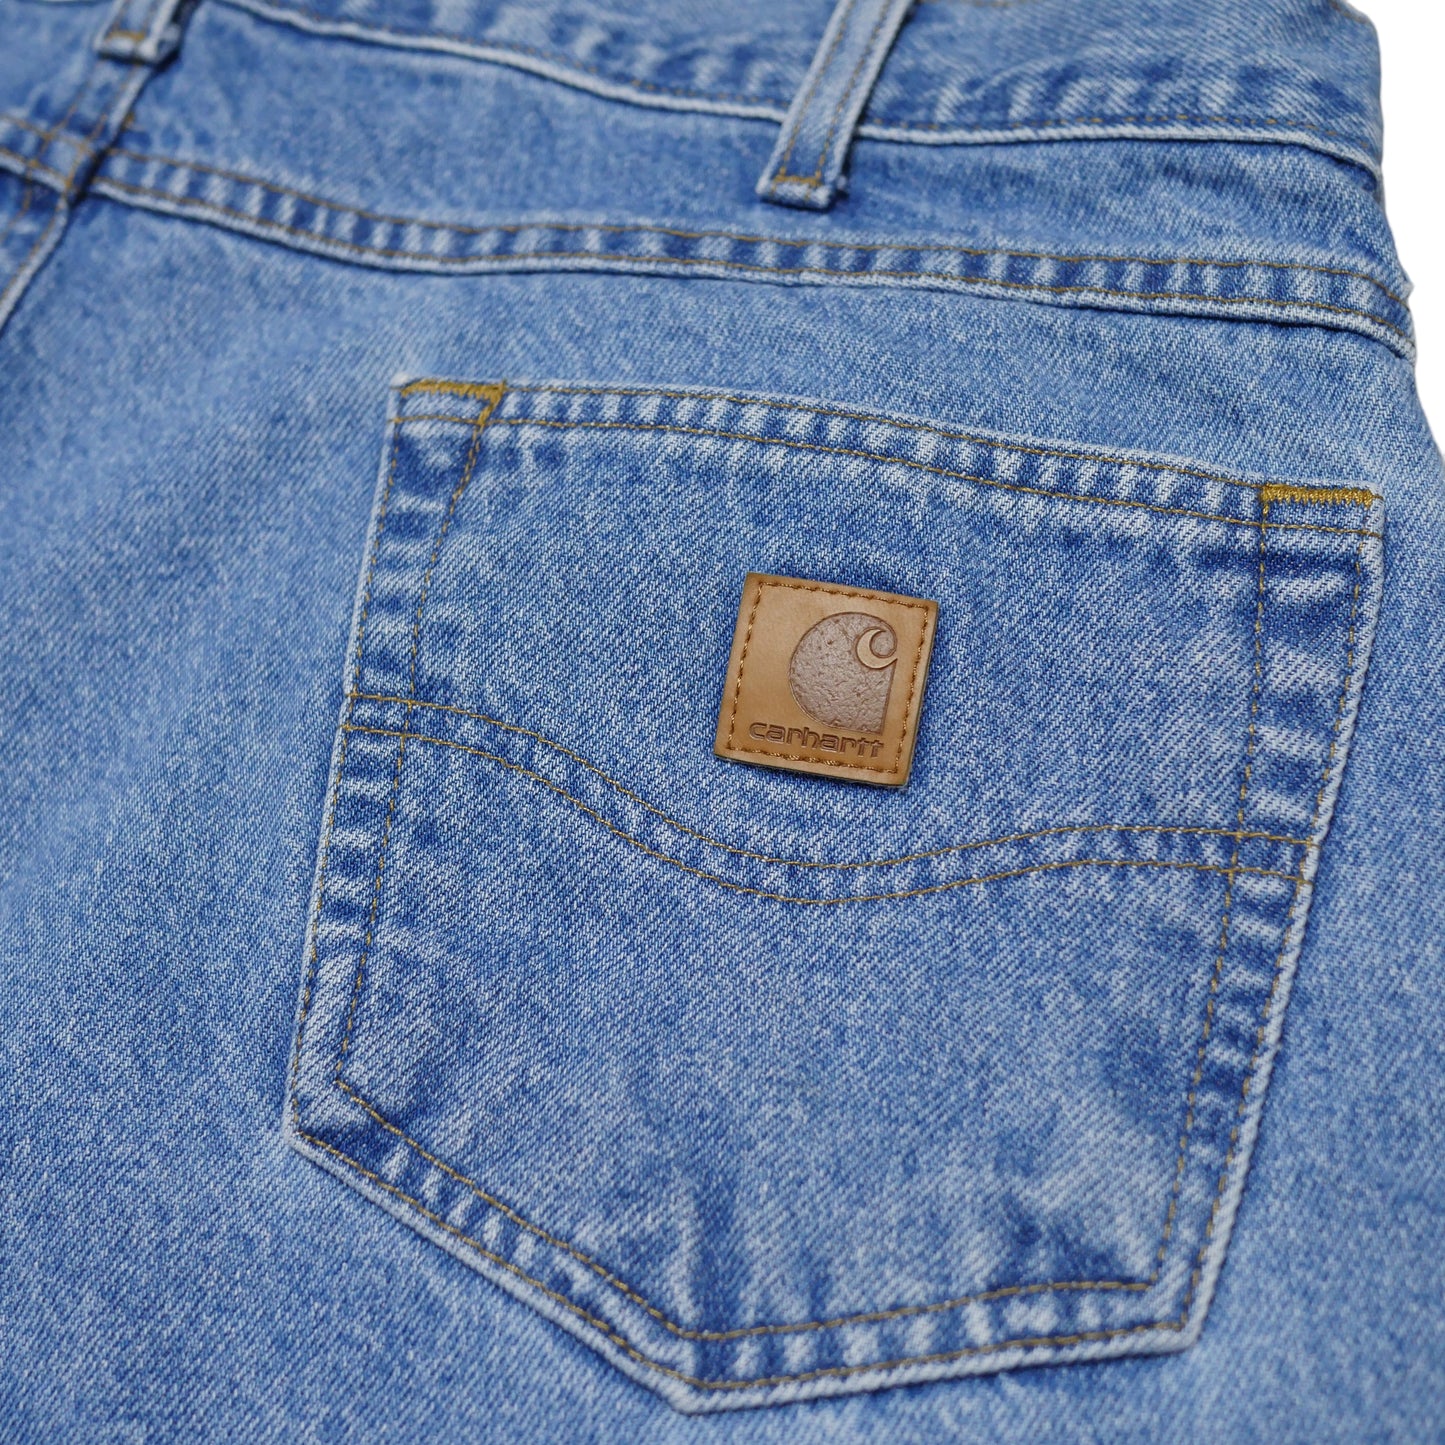 Carhartt Relaxed Fit Denim Jeans - 36